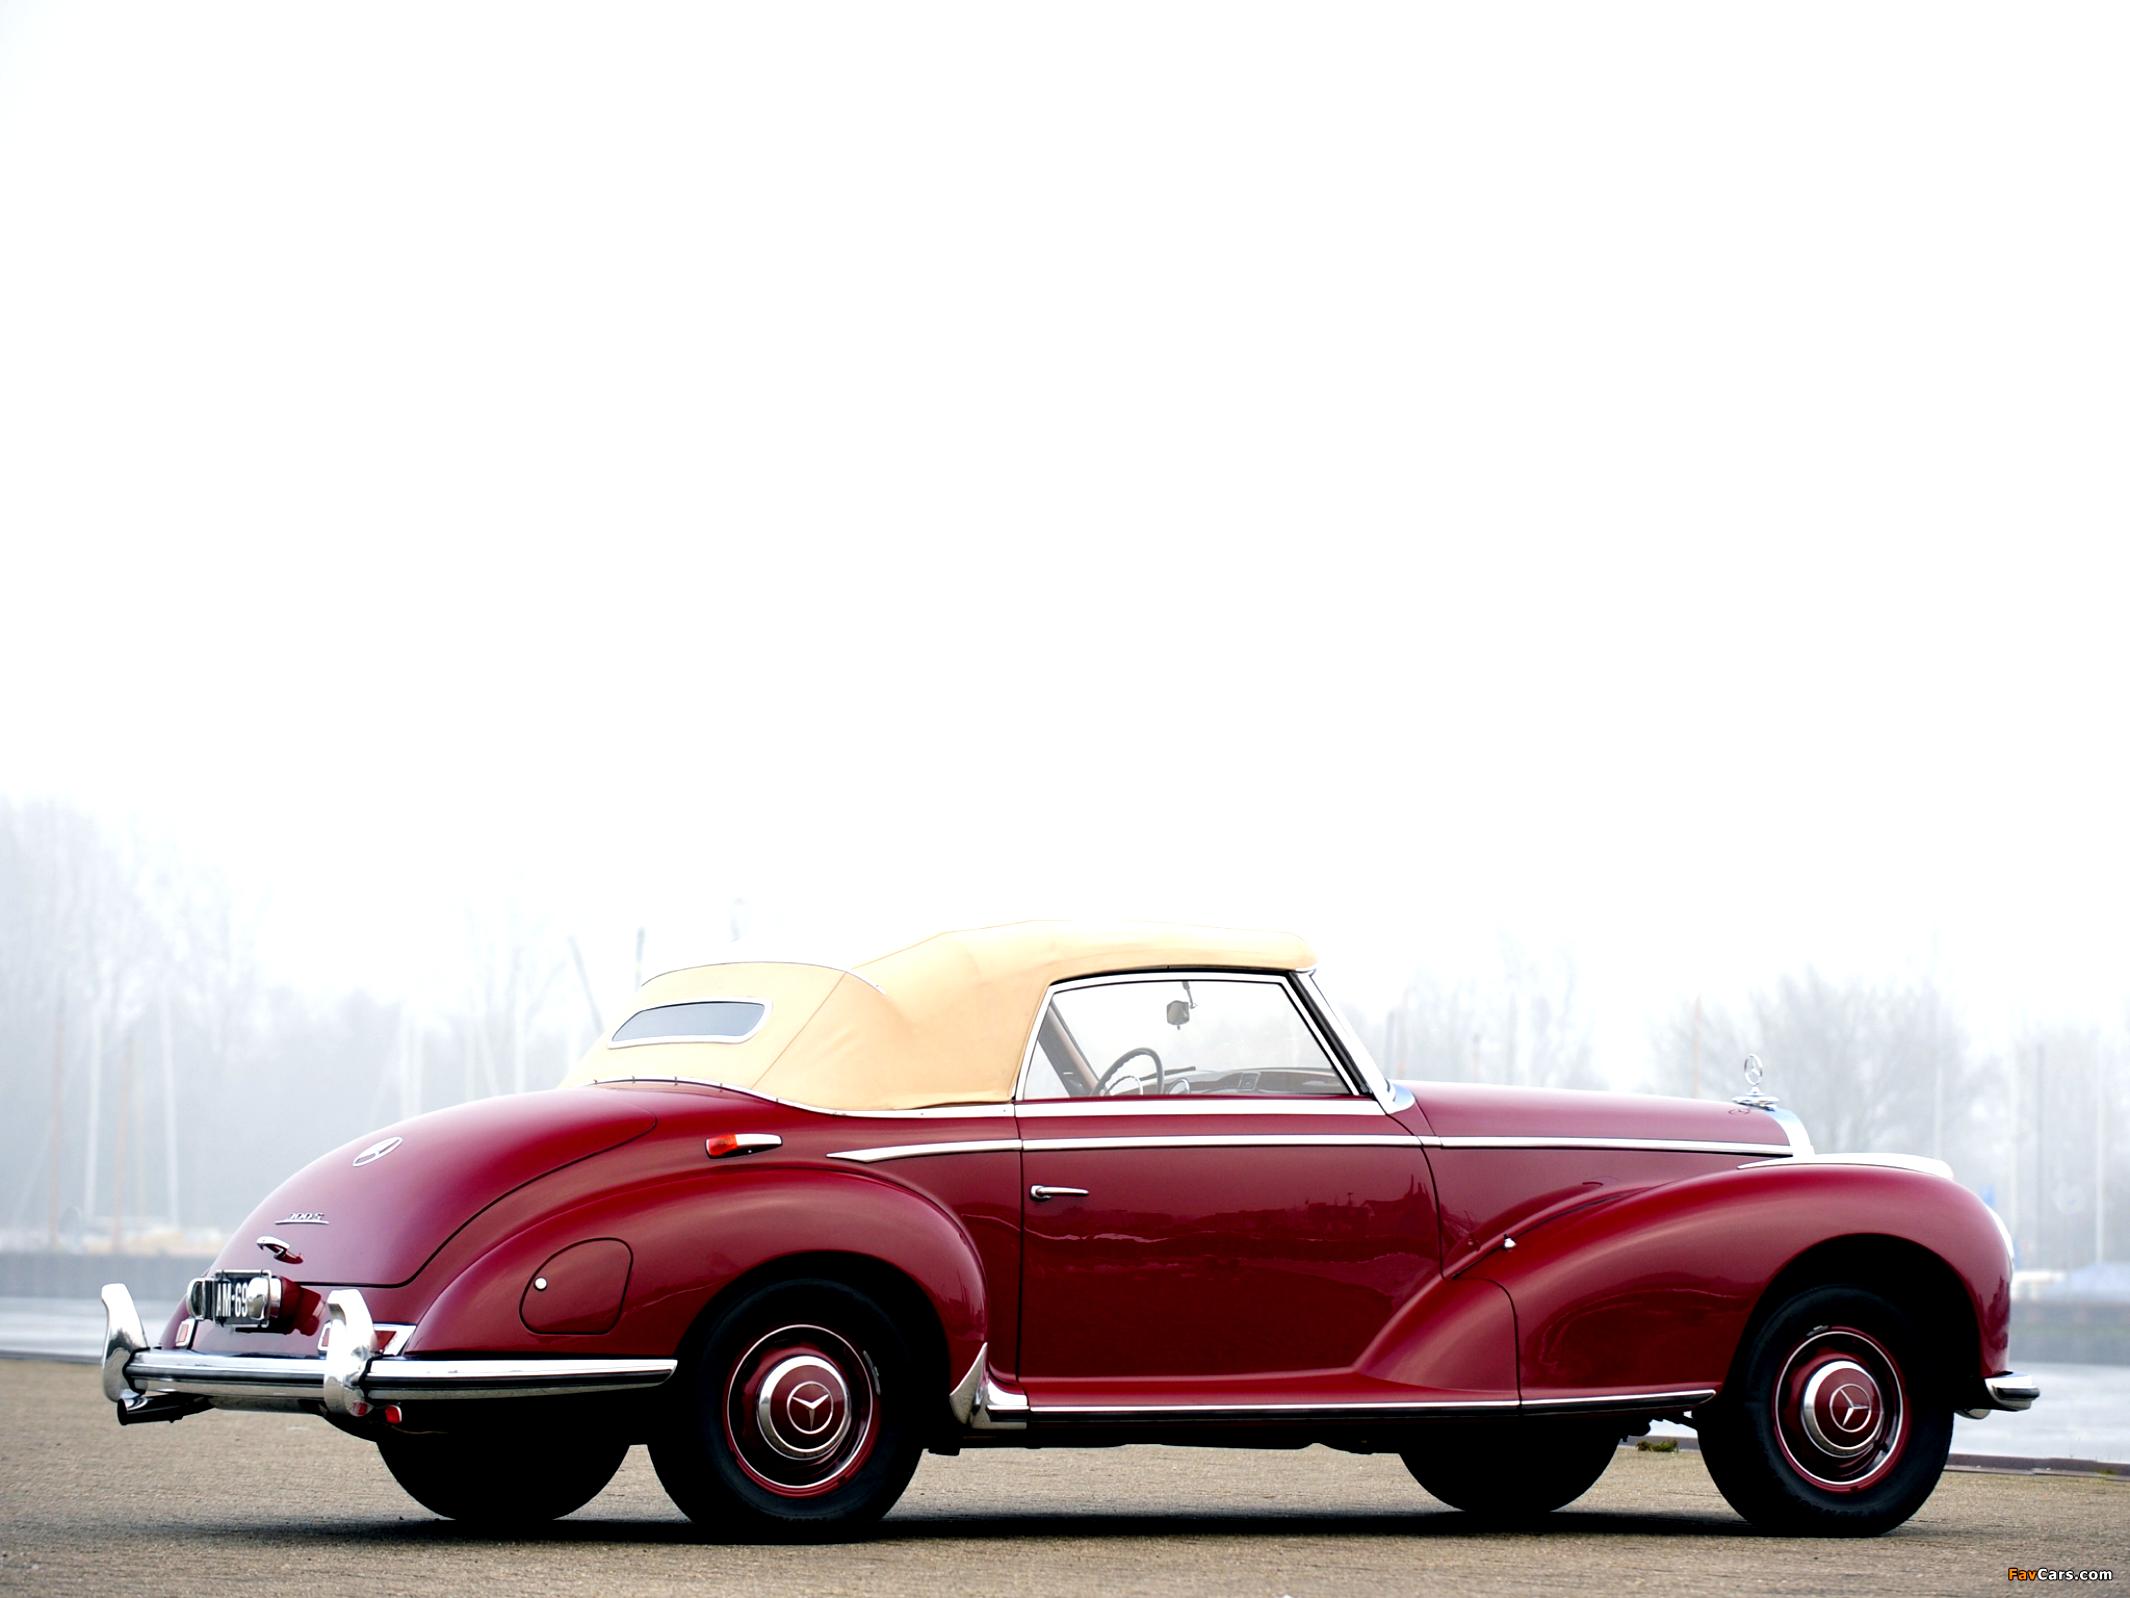 W retro. Mercedes-Benz 300s Cabriolet. Mercedes -Benz 300s Roadster. Мерседес ретро 300 s. Родстер w188 «300s».